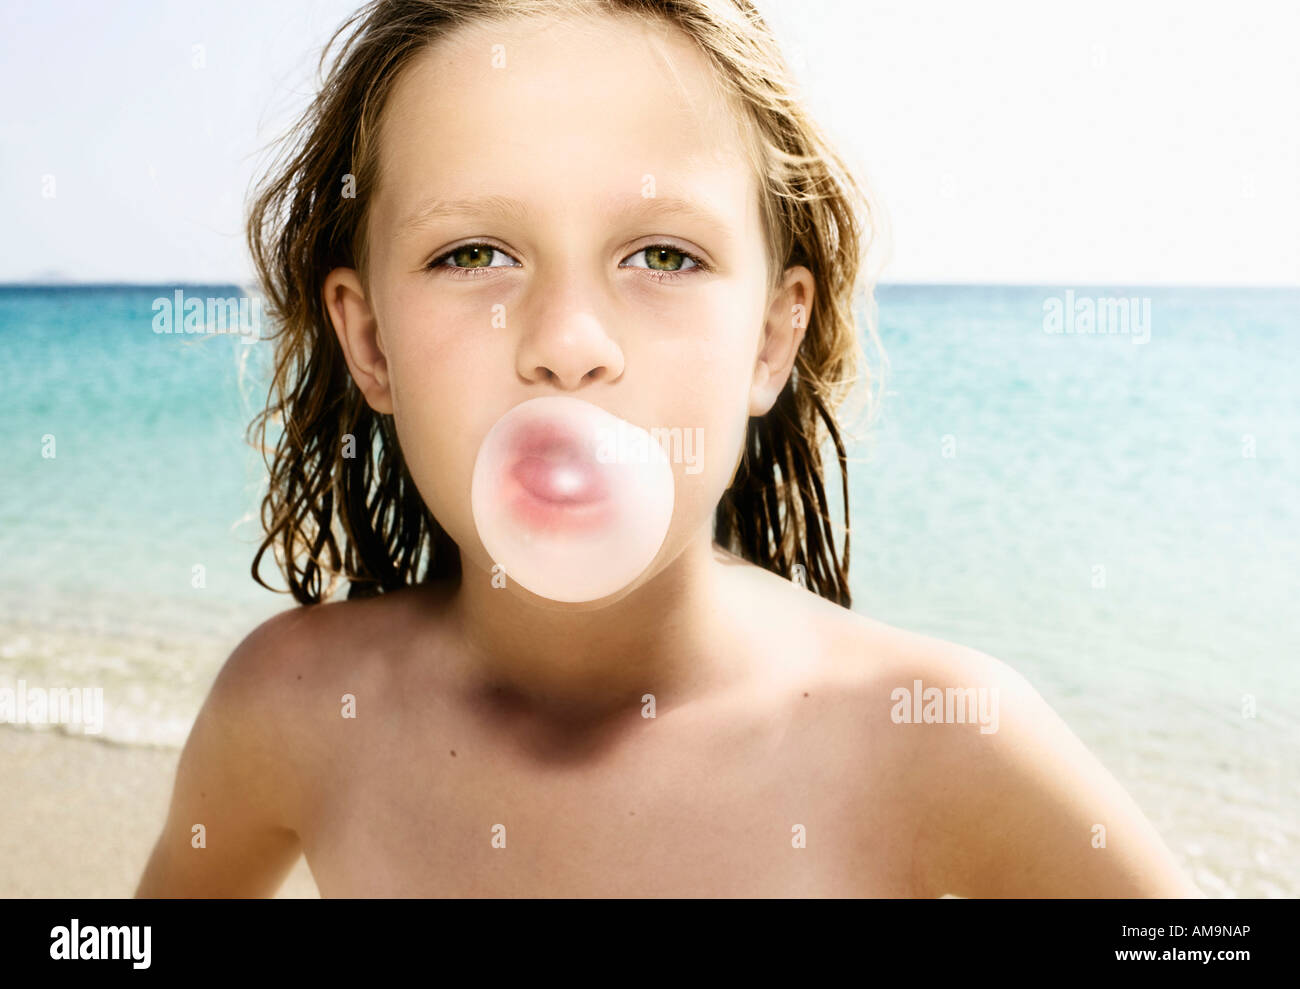 Young Girl On The Beach